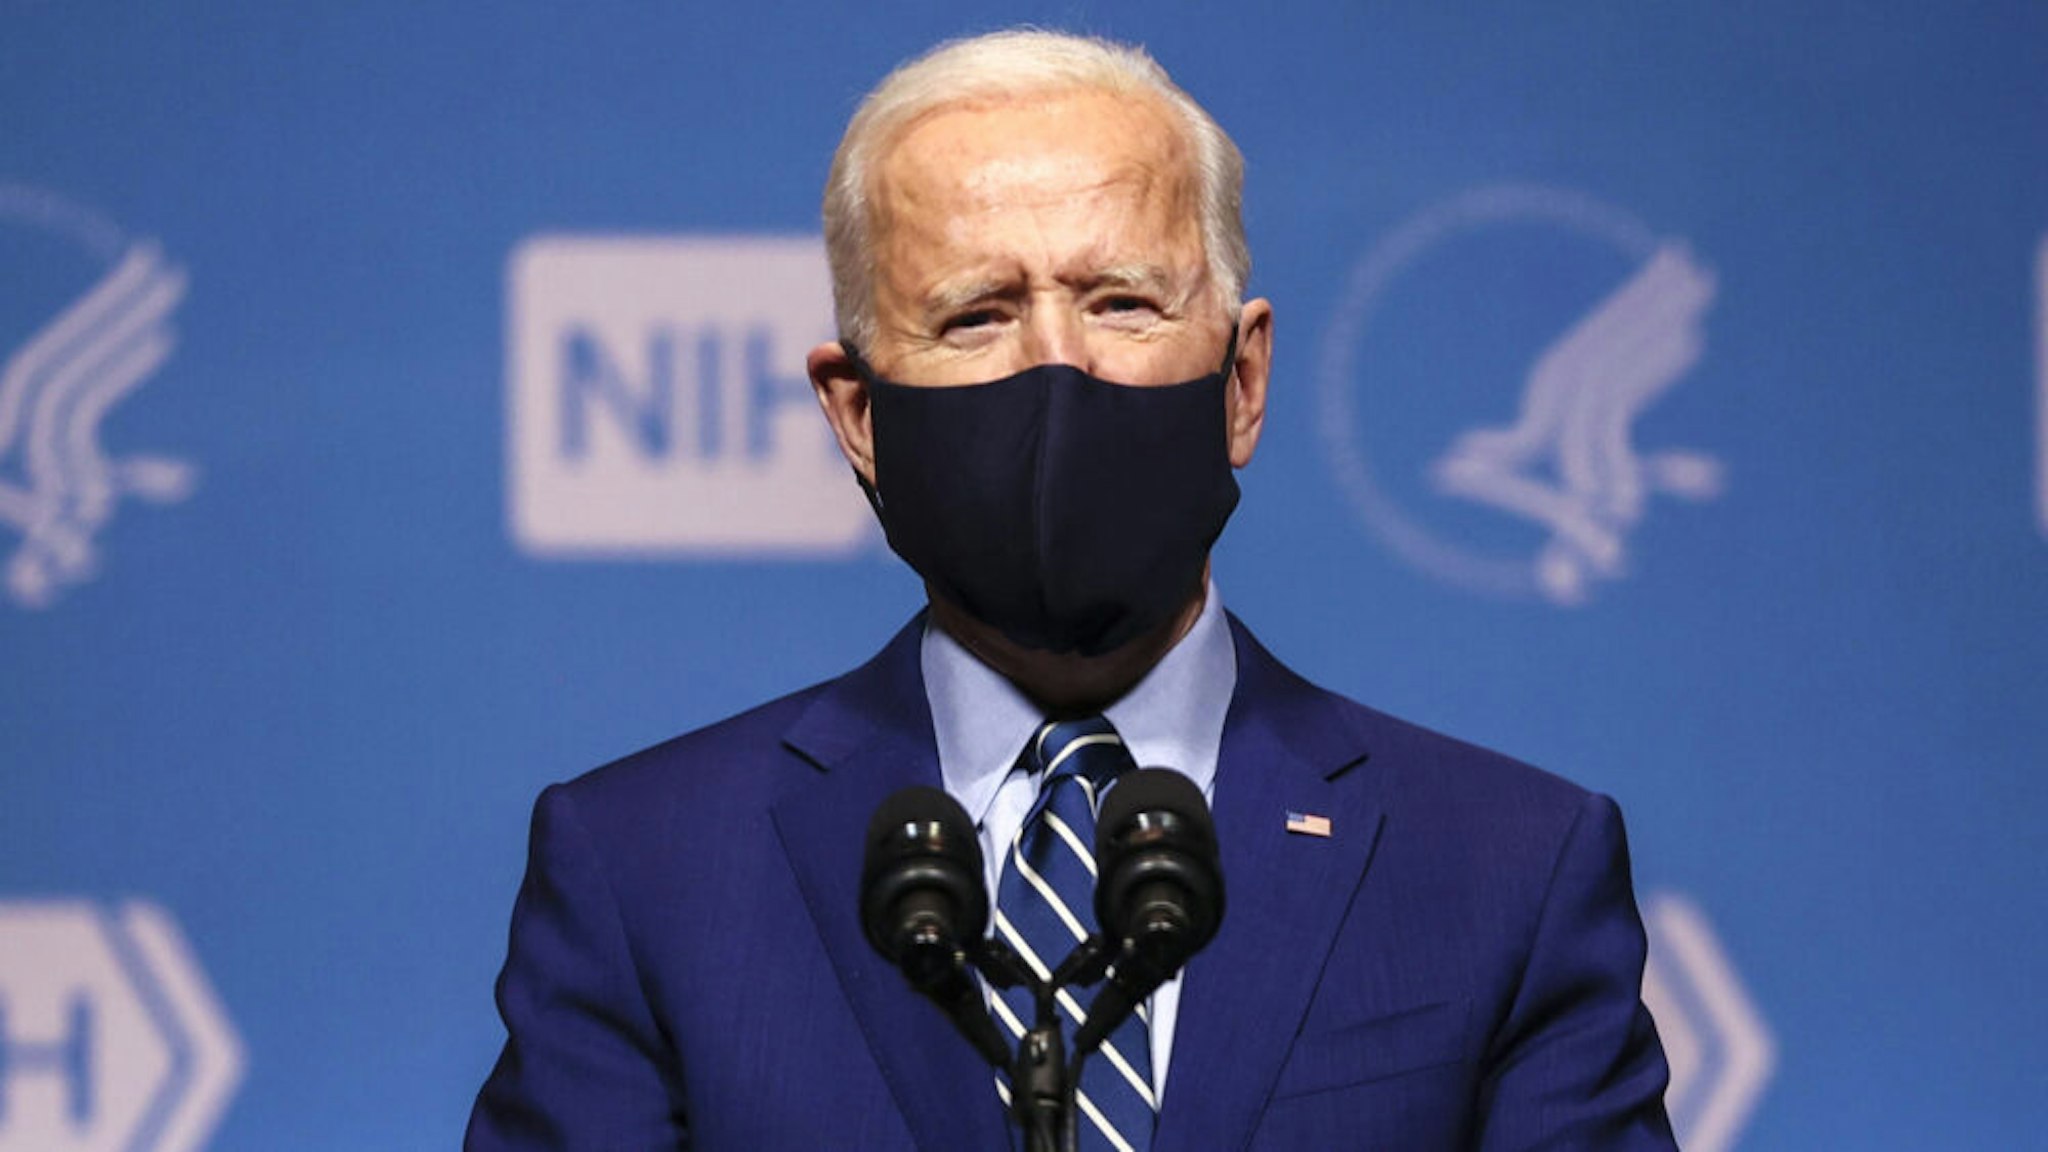 U.S. President Joe Biden wears a protective mask while speaking at the National Institutes of Health (NIH) in Bethesda, Maryland, U.S., on Thursday, Feb. 11, 2021. Biden announced the U.S. Department of Health and Human Services (HHS) and Department of Defense (DOD) have purchased an additional 100 million doses of Covid-19 vaccines from both Pfizer Inc. and Moderna Inc.